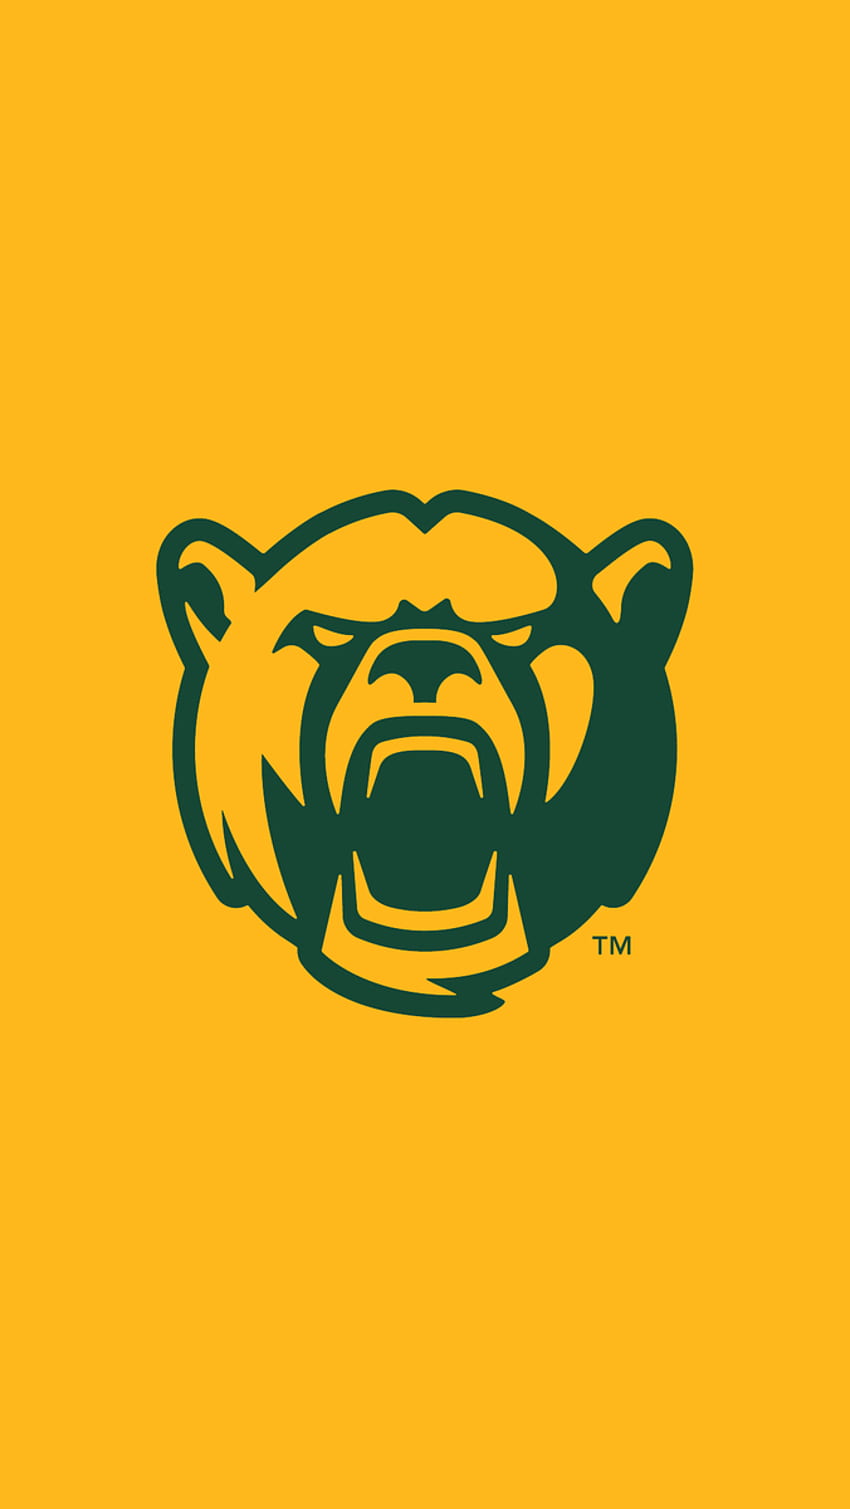 Download wallpapers Baylor Athletics flag NCAA green yellow metal  background american football team Baylor Athletics logo USA american  football golden logo Baylor Athletics for desktop free Pictures for  desktop free